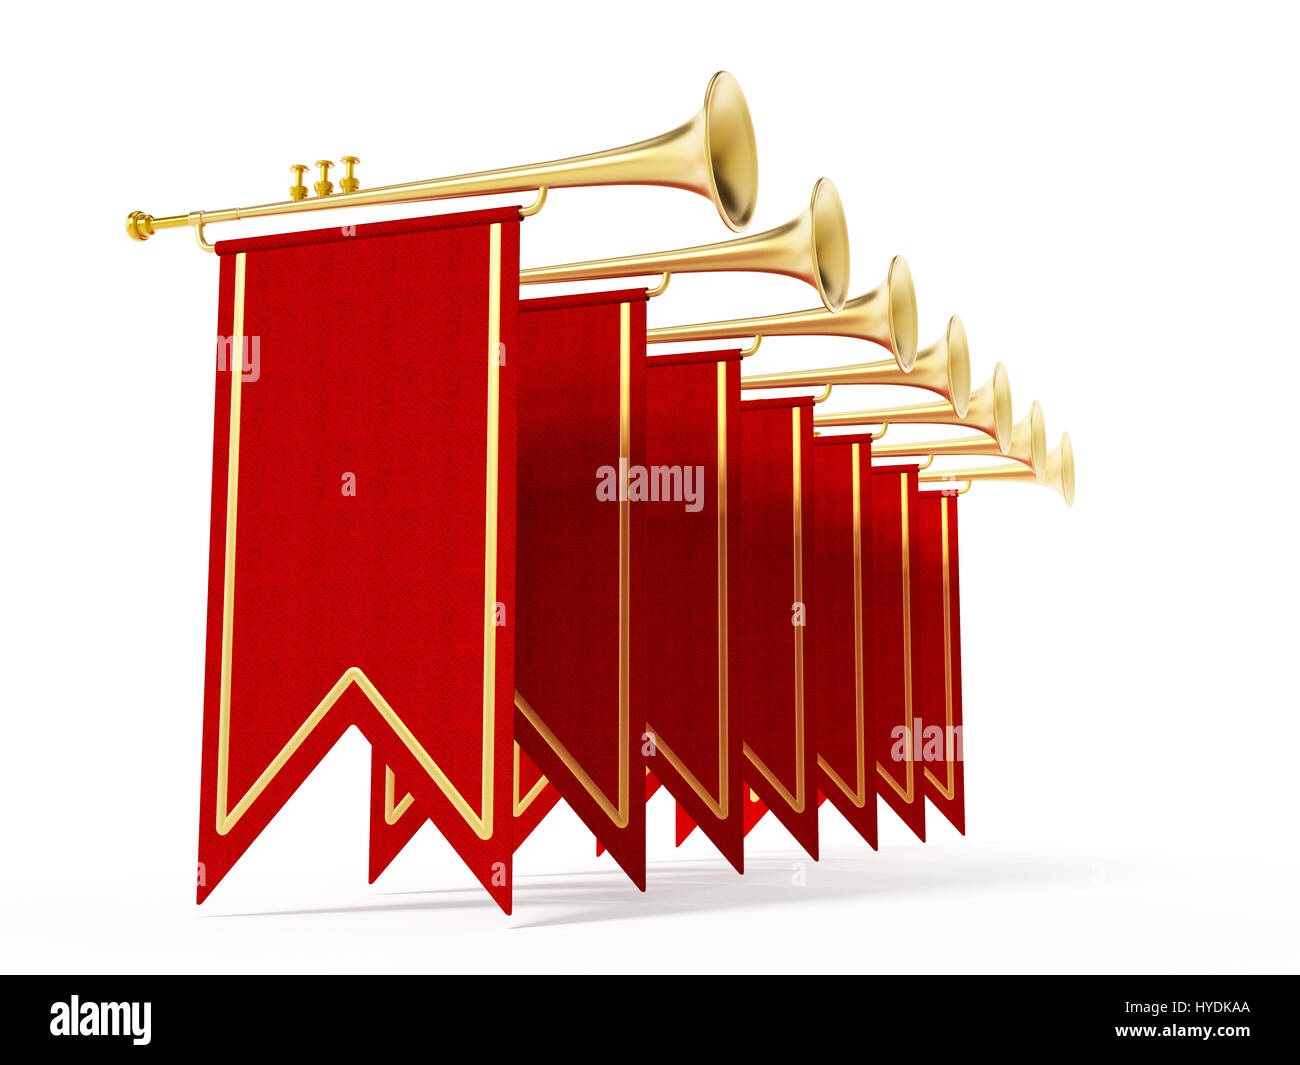 Swallow flags and trumpets isolated on white background. 3D illustration. Stock Photo